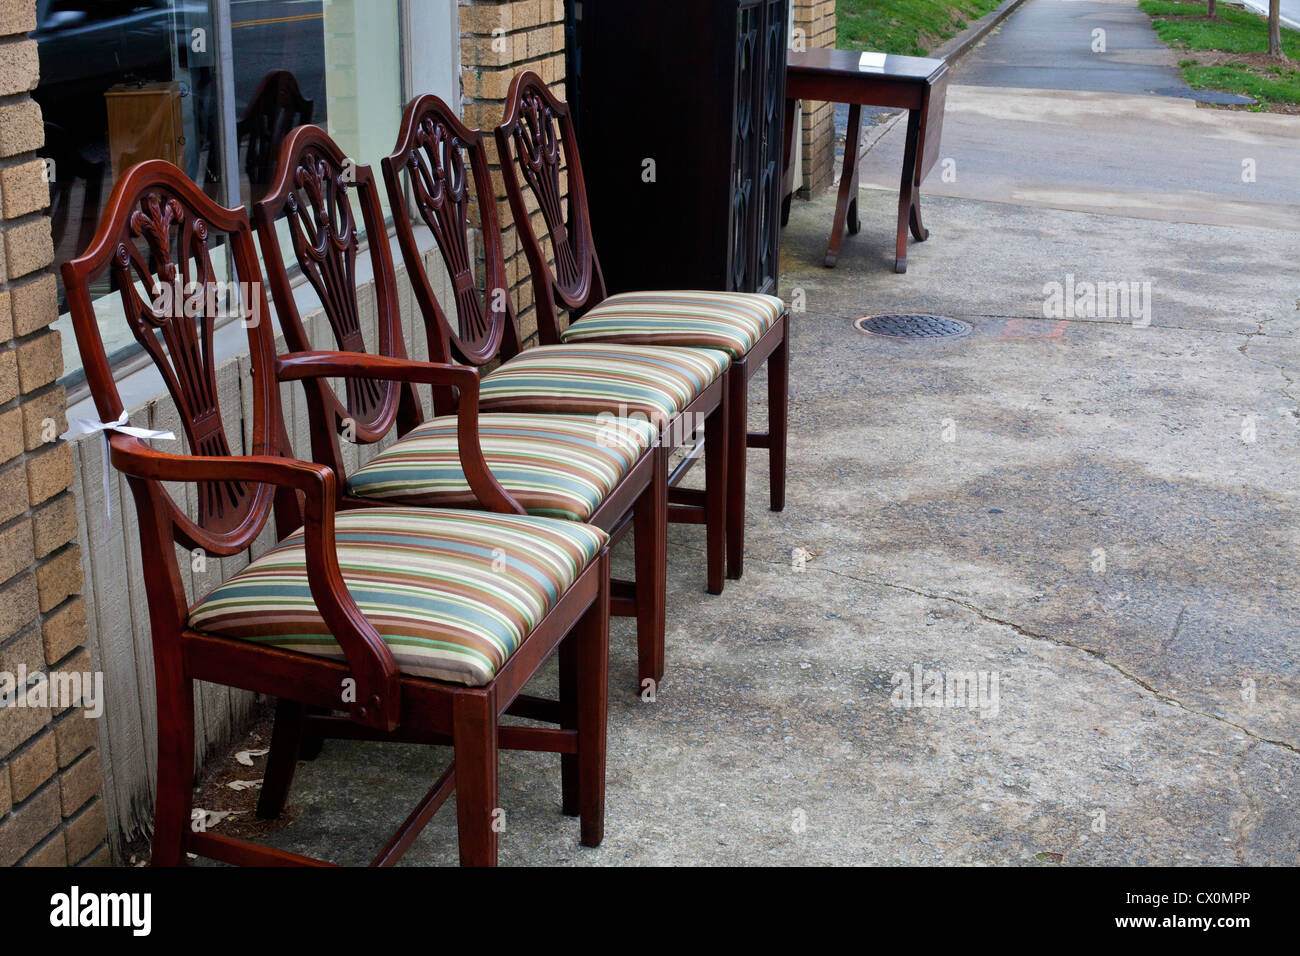 A row of antique chairs for sale on a sidewalk outside an antique shop in Pthe Poncey-Highlands region of Atlanta, Georgia. Stock Photo